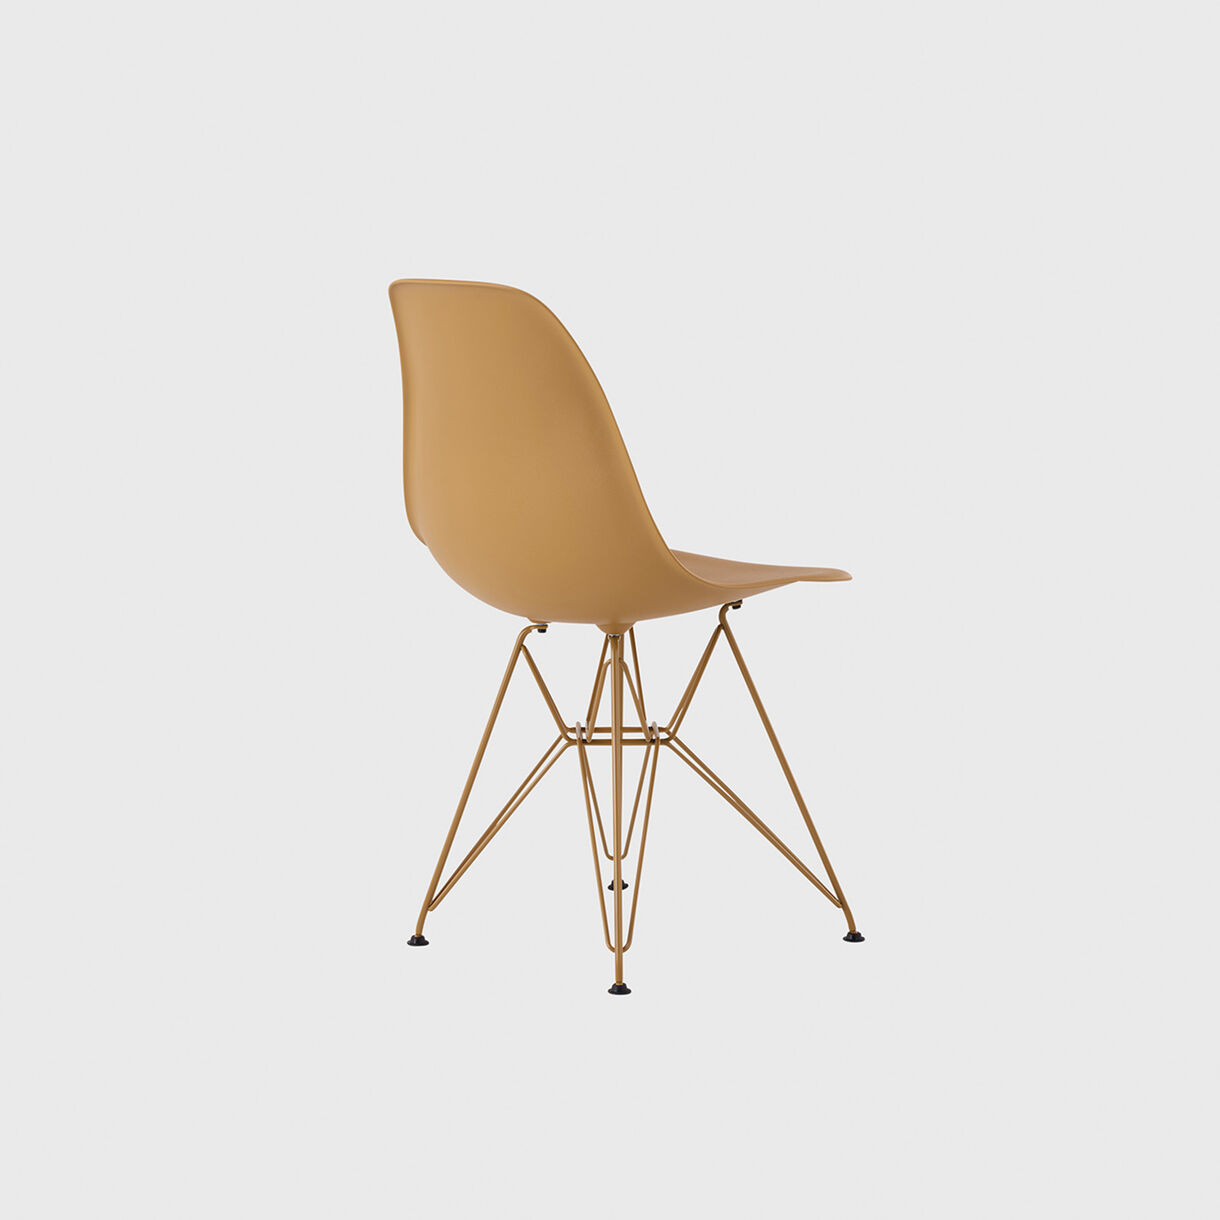 HM x Hay Eames Moulded Plastic Side Chair, Wire Base, Toffee